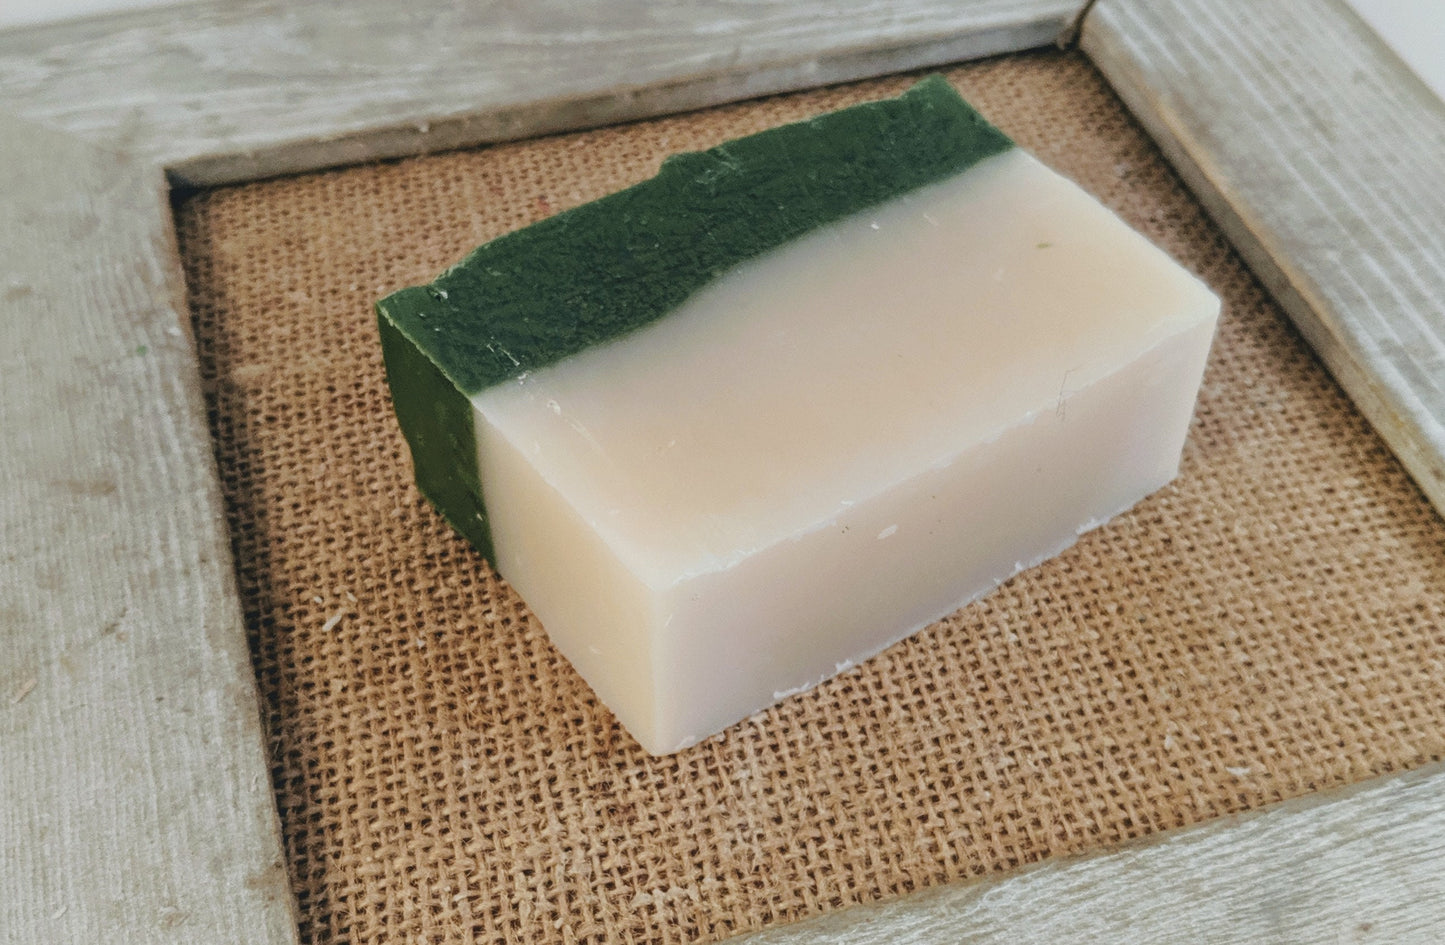 Irish Luck Soap - soap for men - shea butter soap - Hanna Herbals - Gifts for men